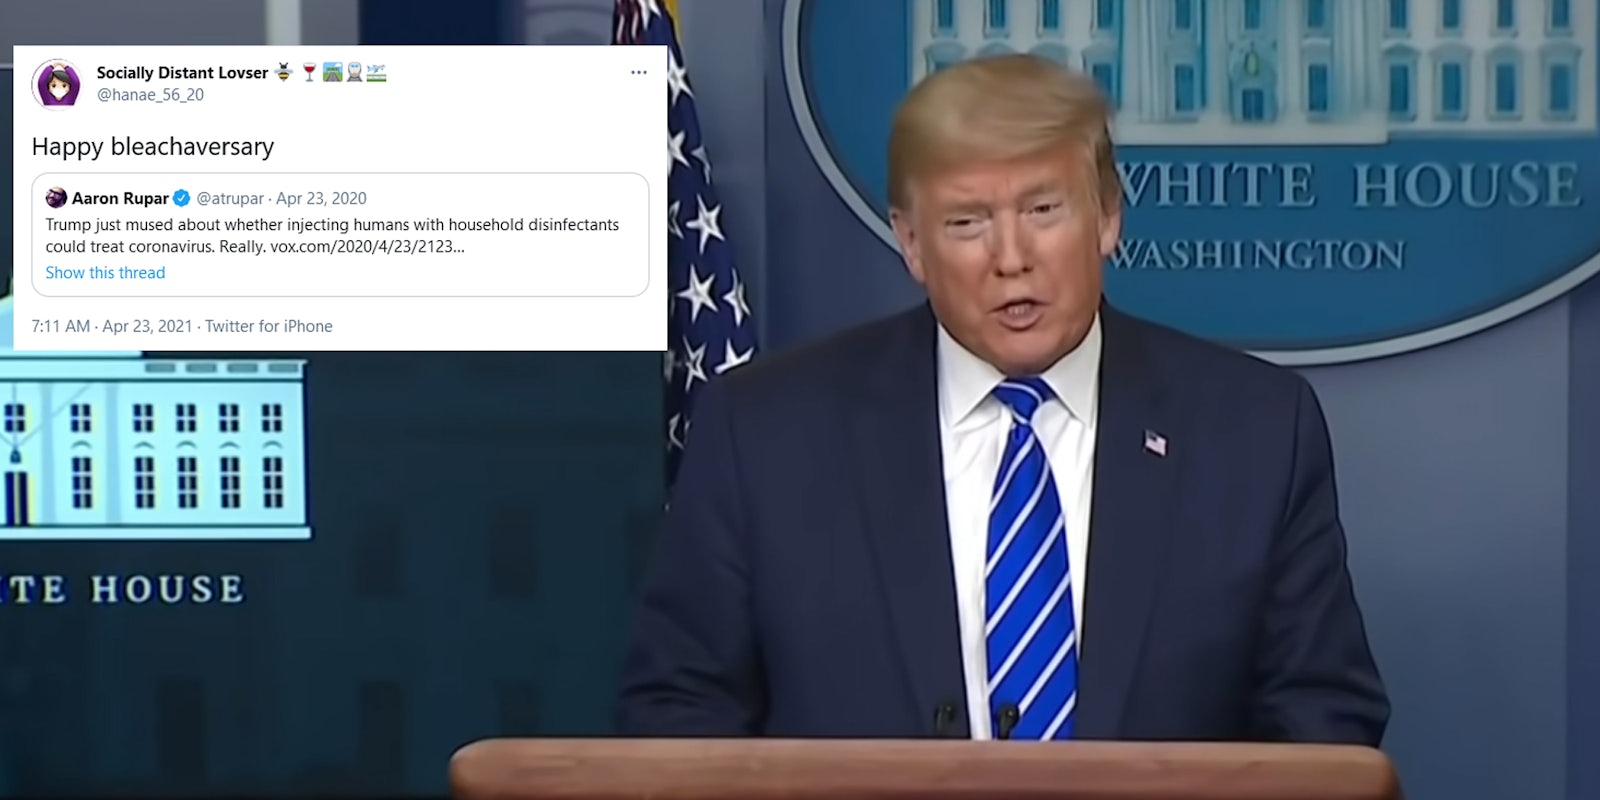 Former President Donald Trump speaking at a press conference on April 23, 2020. A tweet is next to him mocking the one year anniversary of him talking about an 'injection' of disinfectant to combat the coronavirus pandemic.